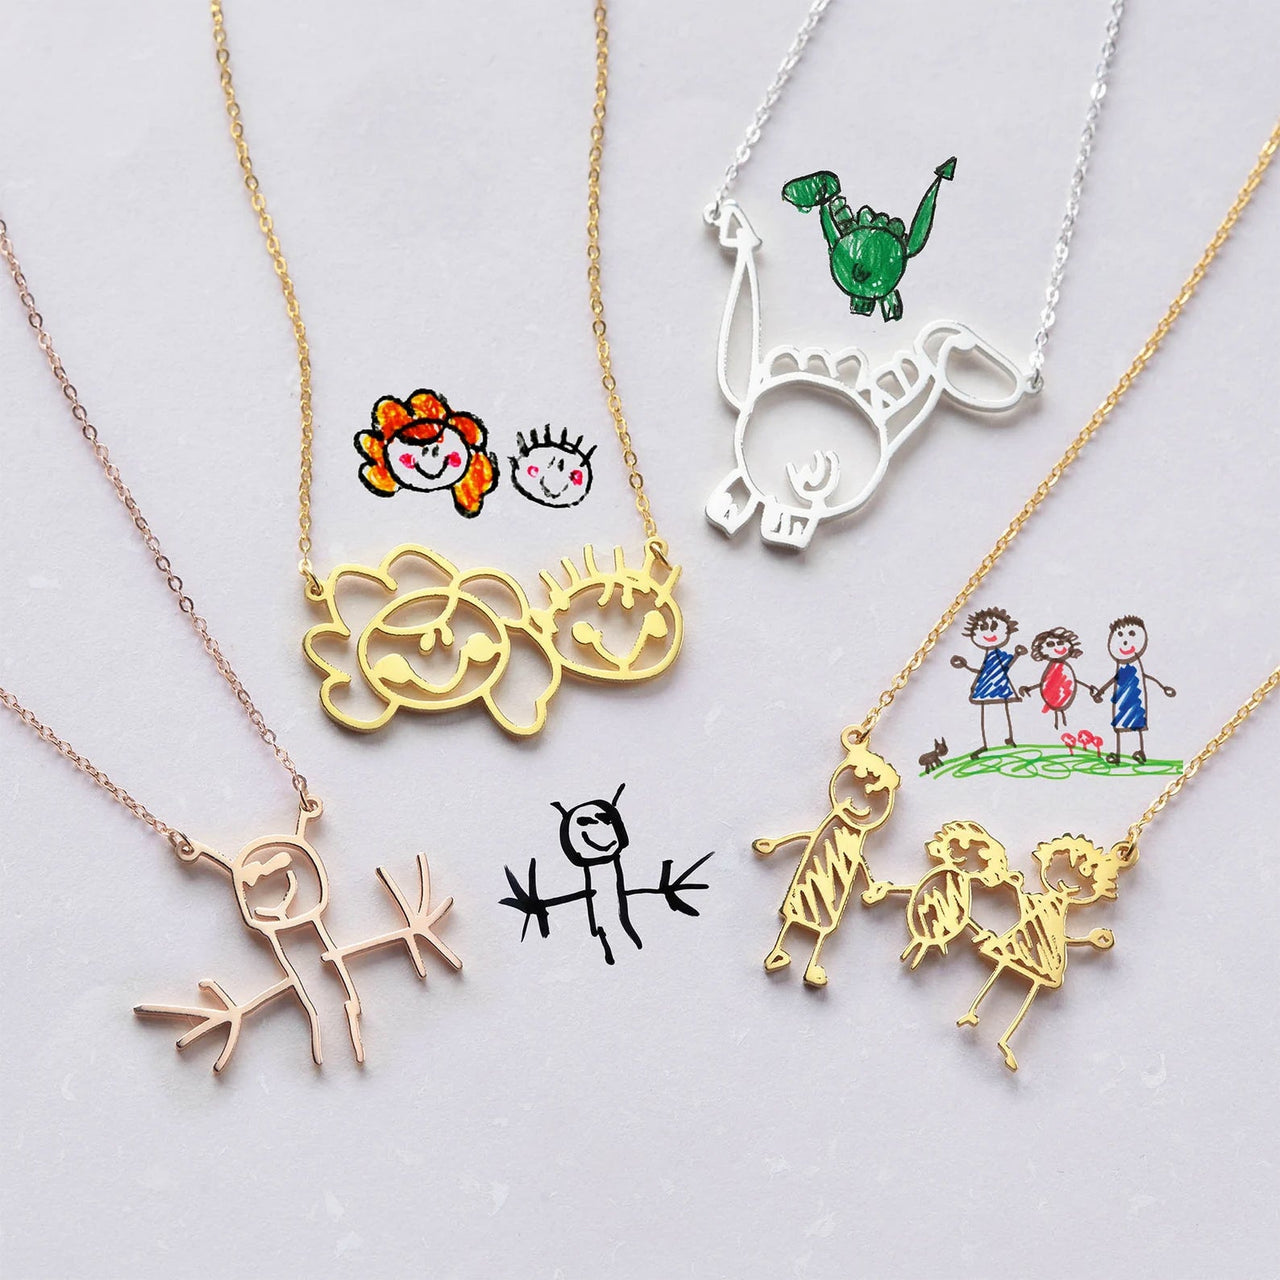 Your Kids Drawing on Jewelry - Love You This Much